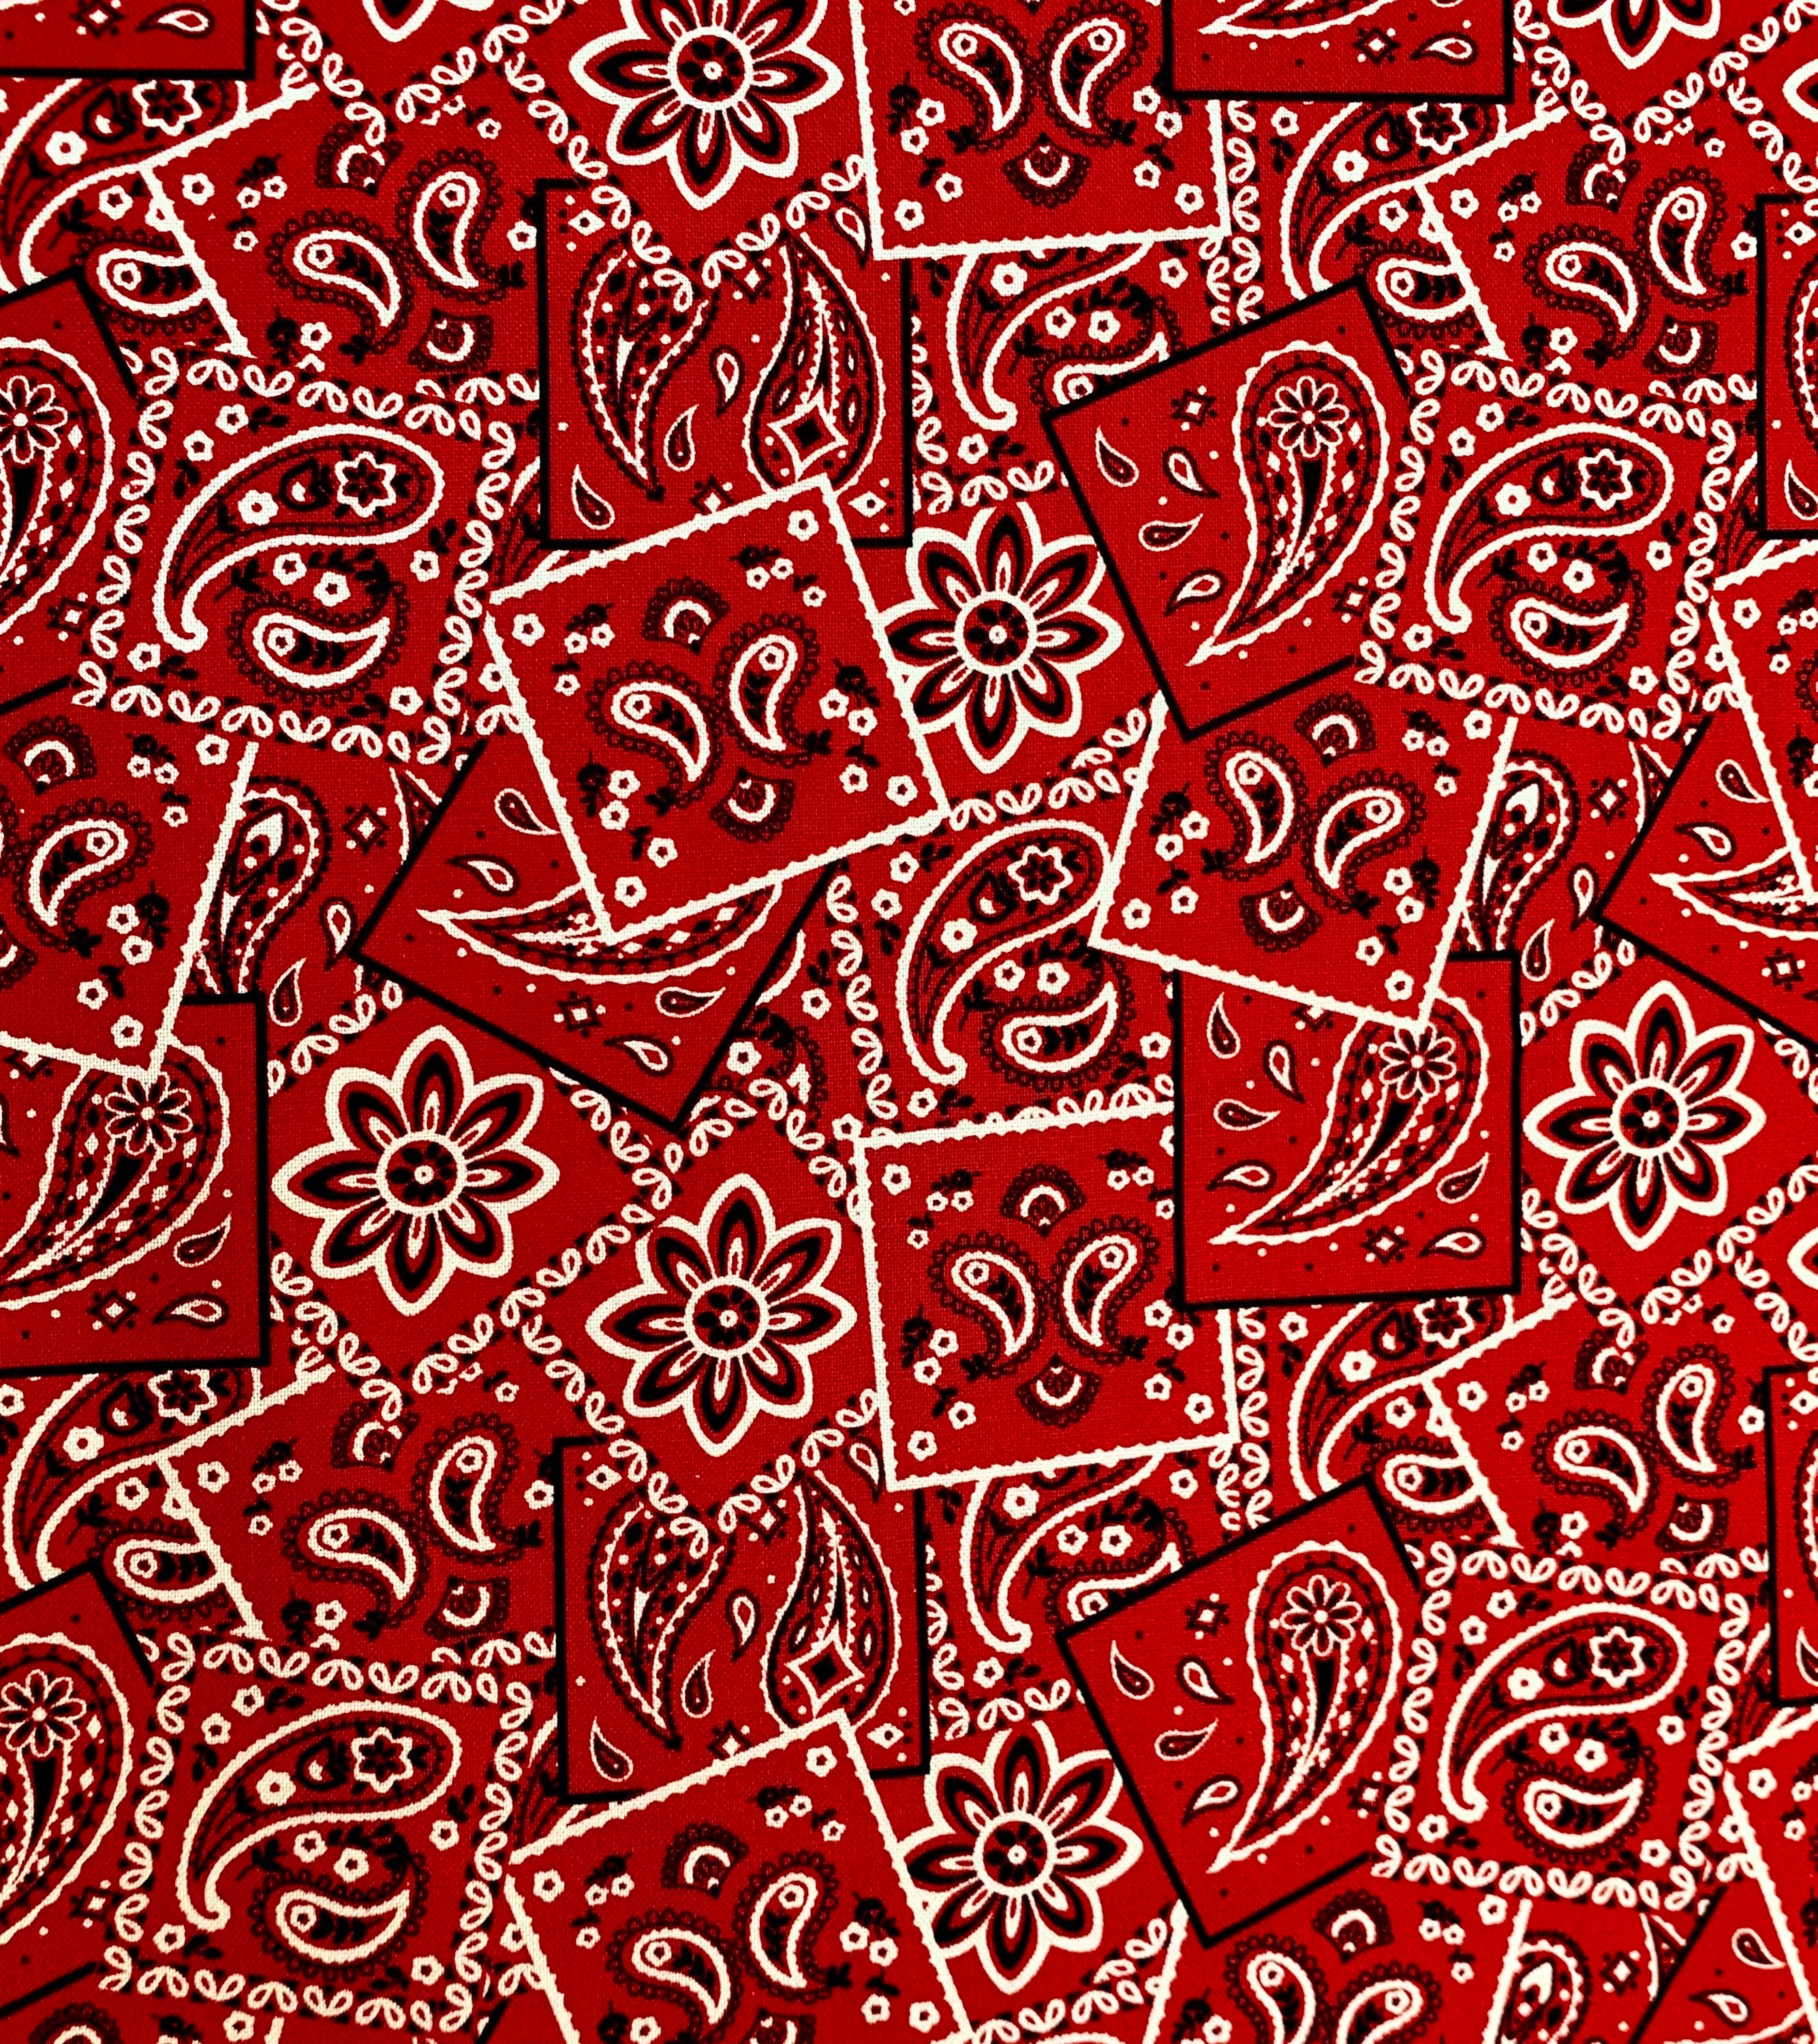 Red Bandana fabric, Classic paisley Bandanna fabric on red, Ranch fabric,  Farmers fabric, Cowboys fabric 100% cotton for sewing